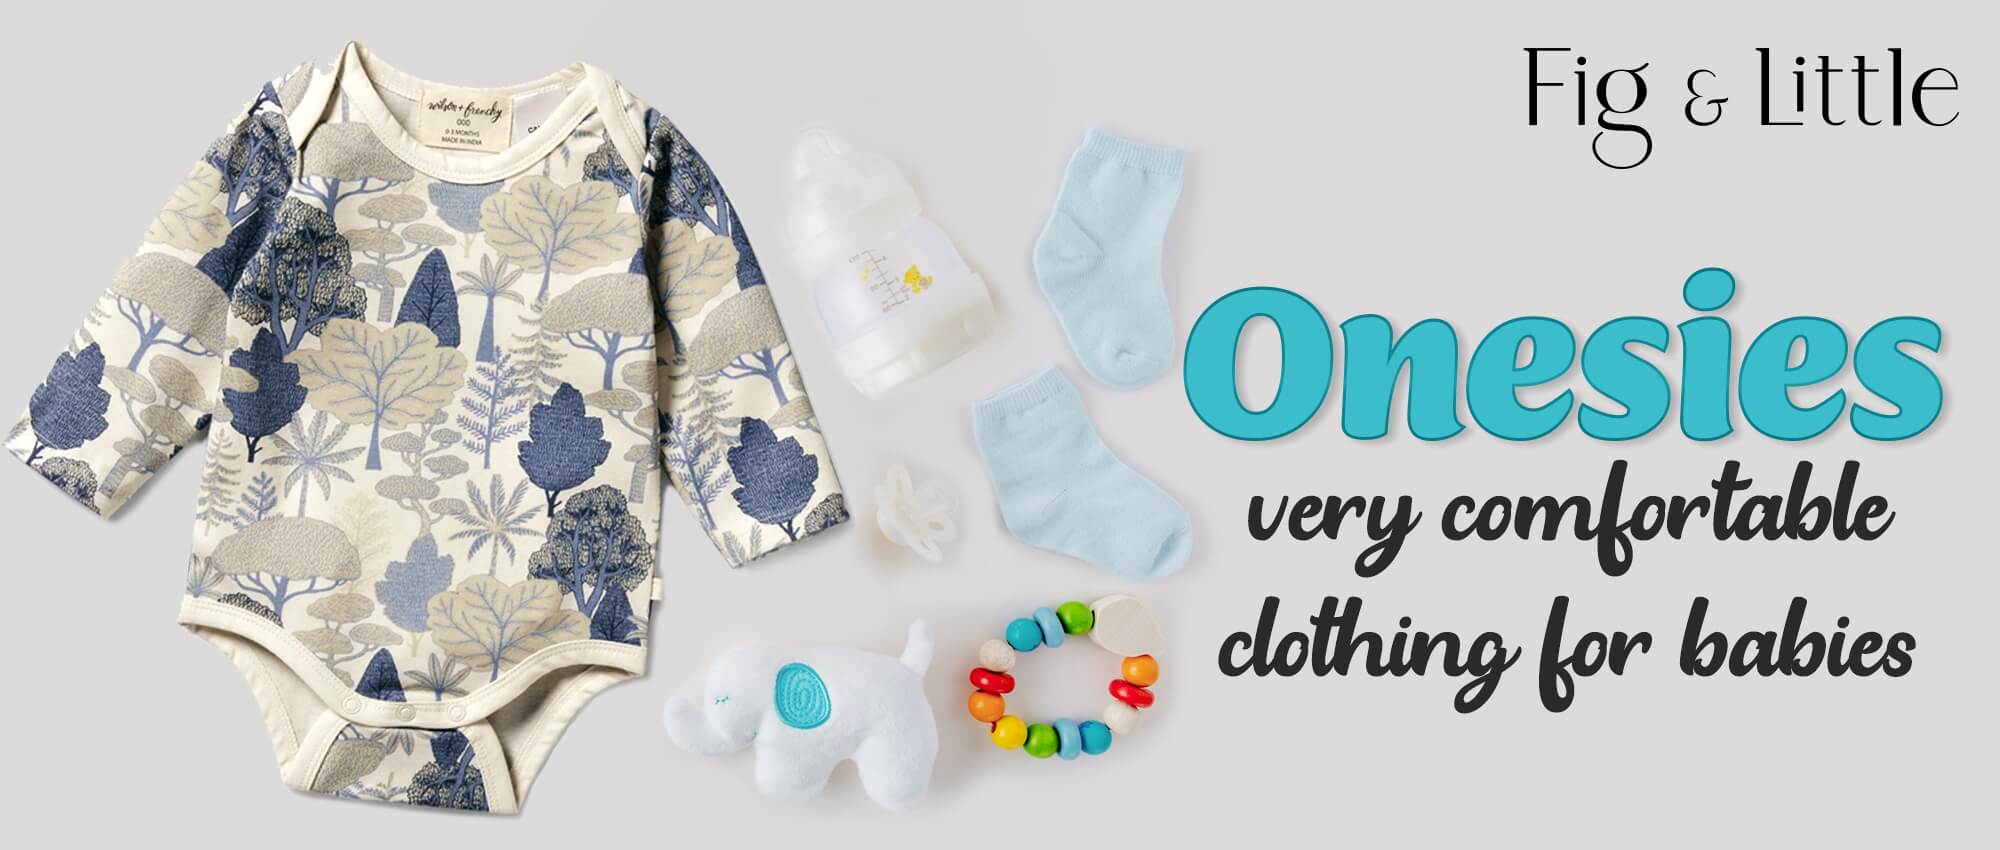 ONESIES VERY COMFORTABLE CLOTHING FOR BABIES